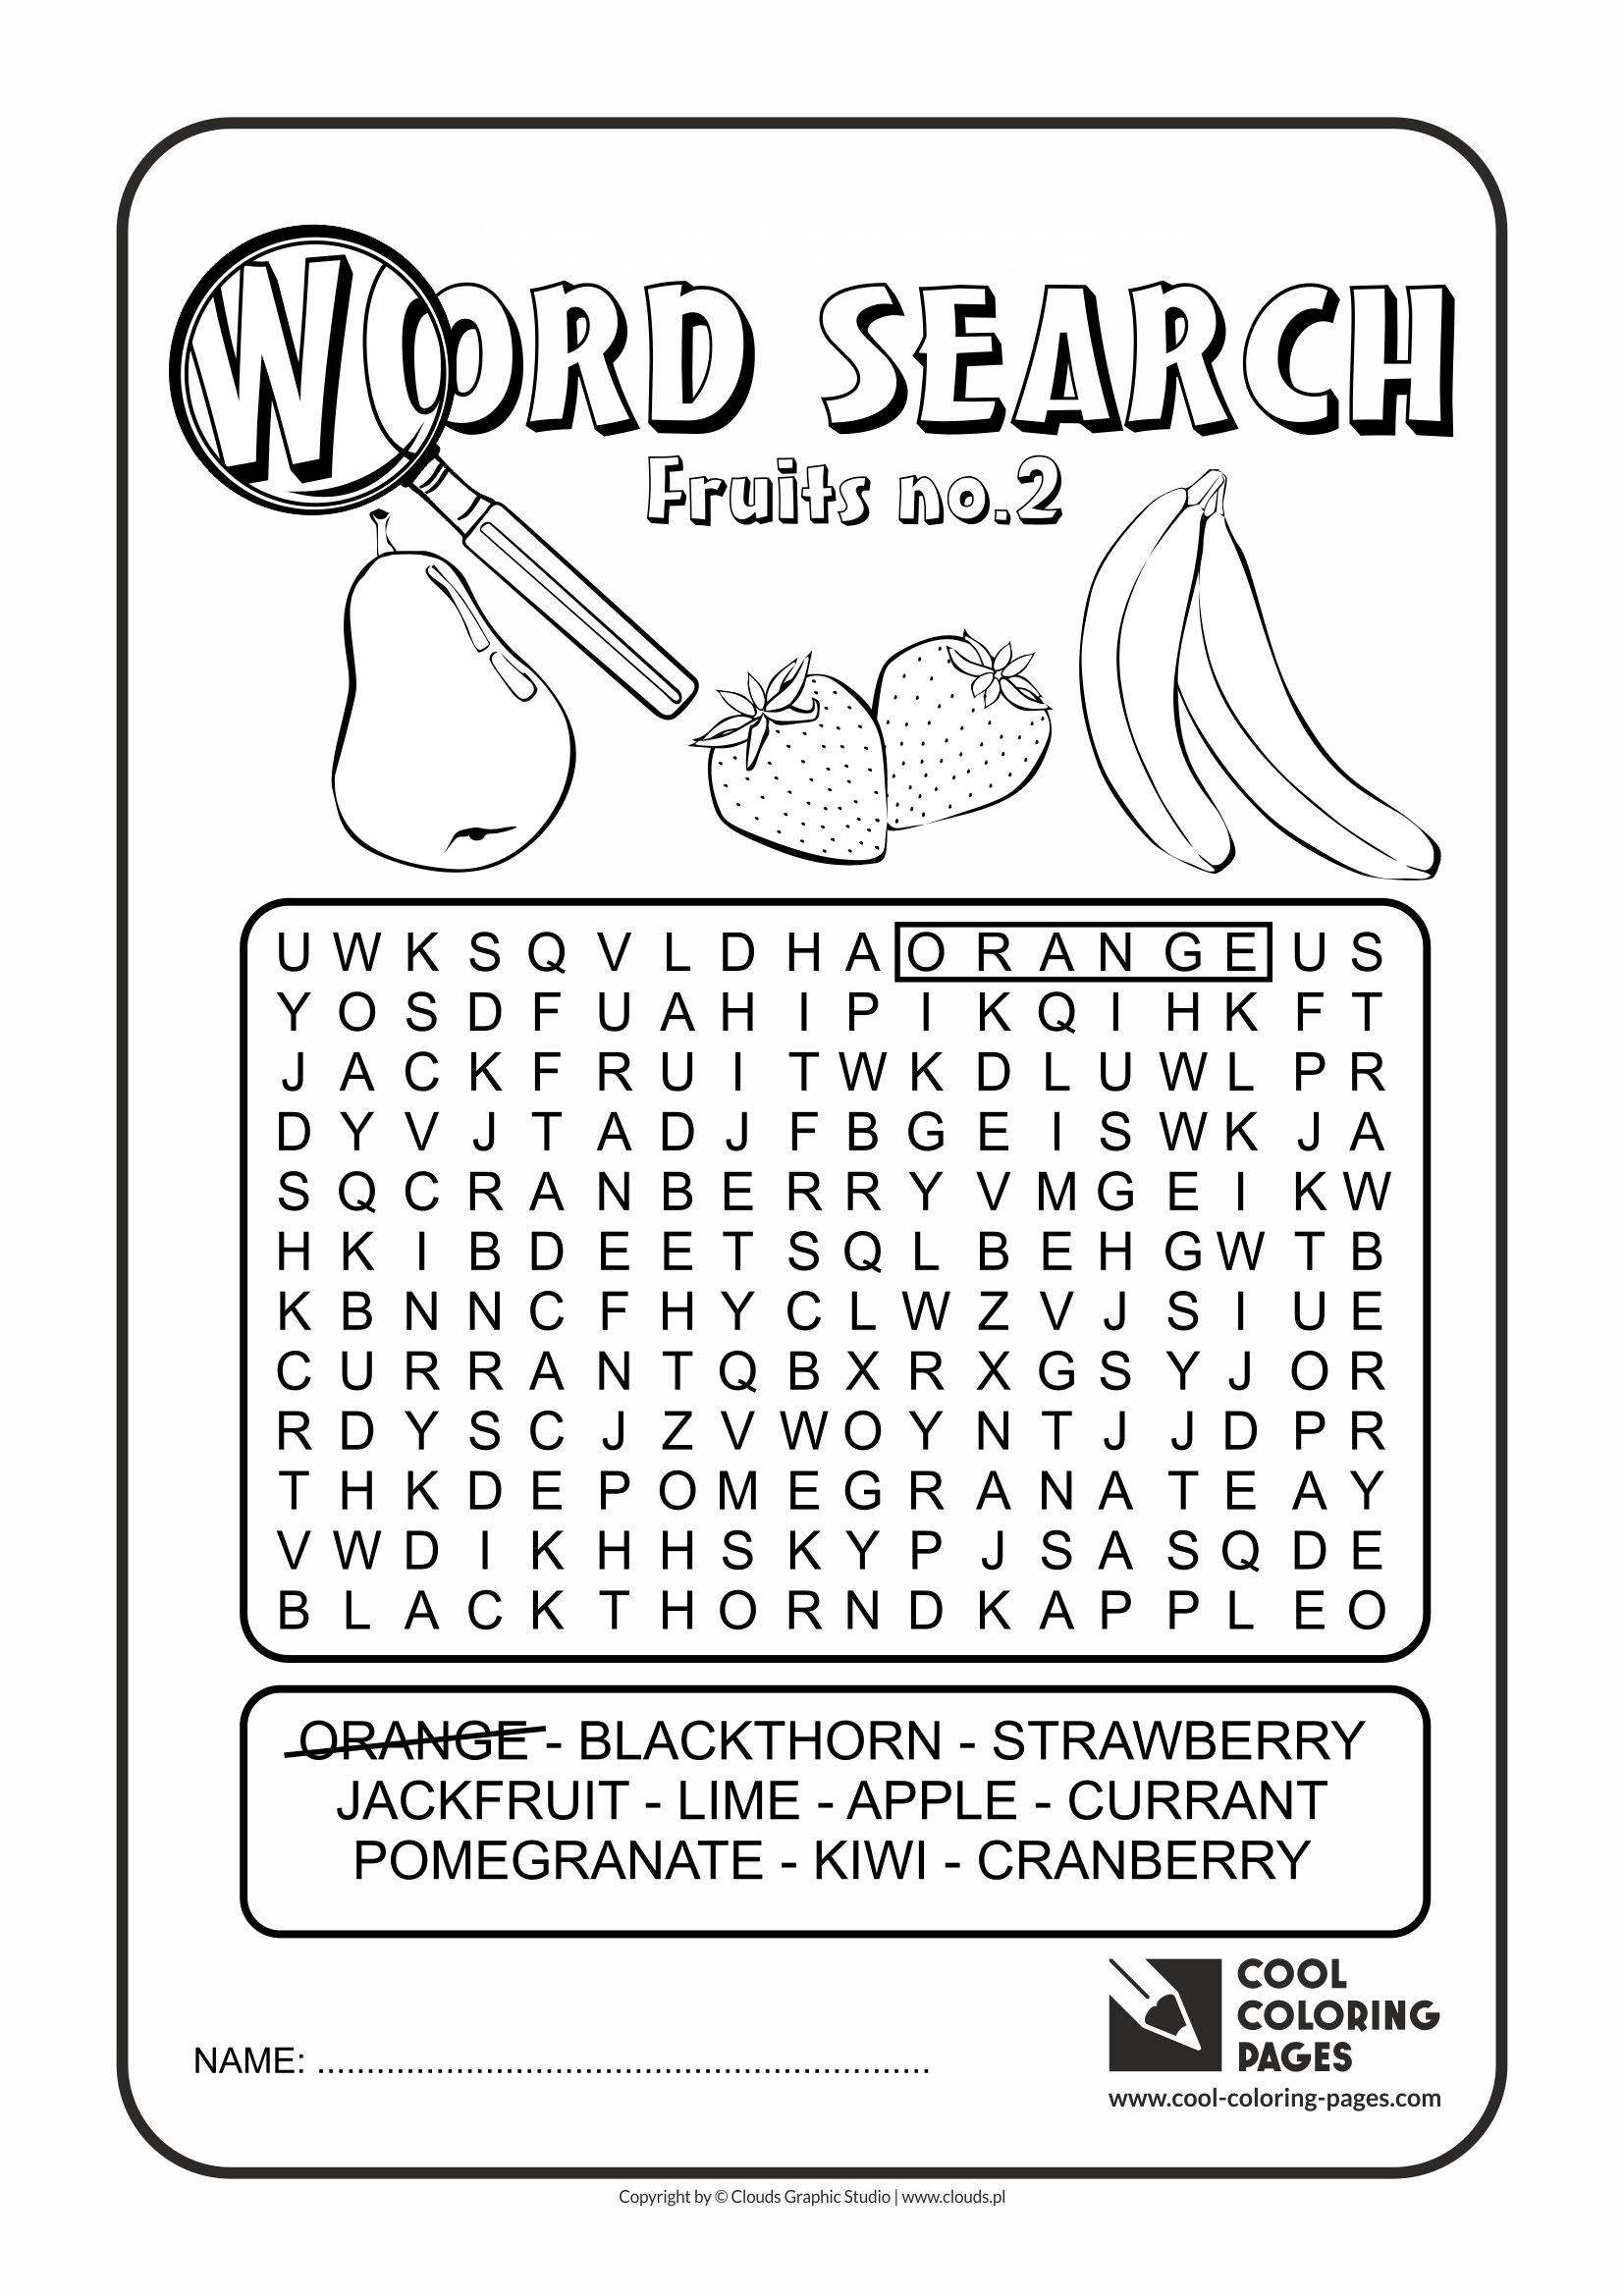 Cool coloring pages word search